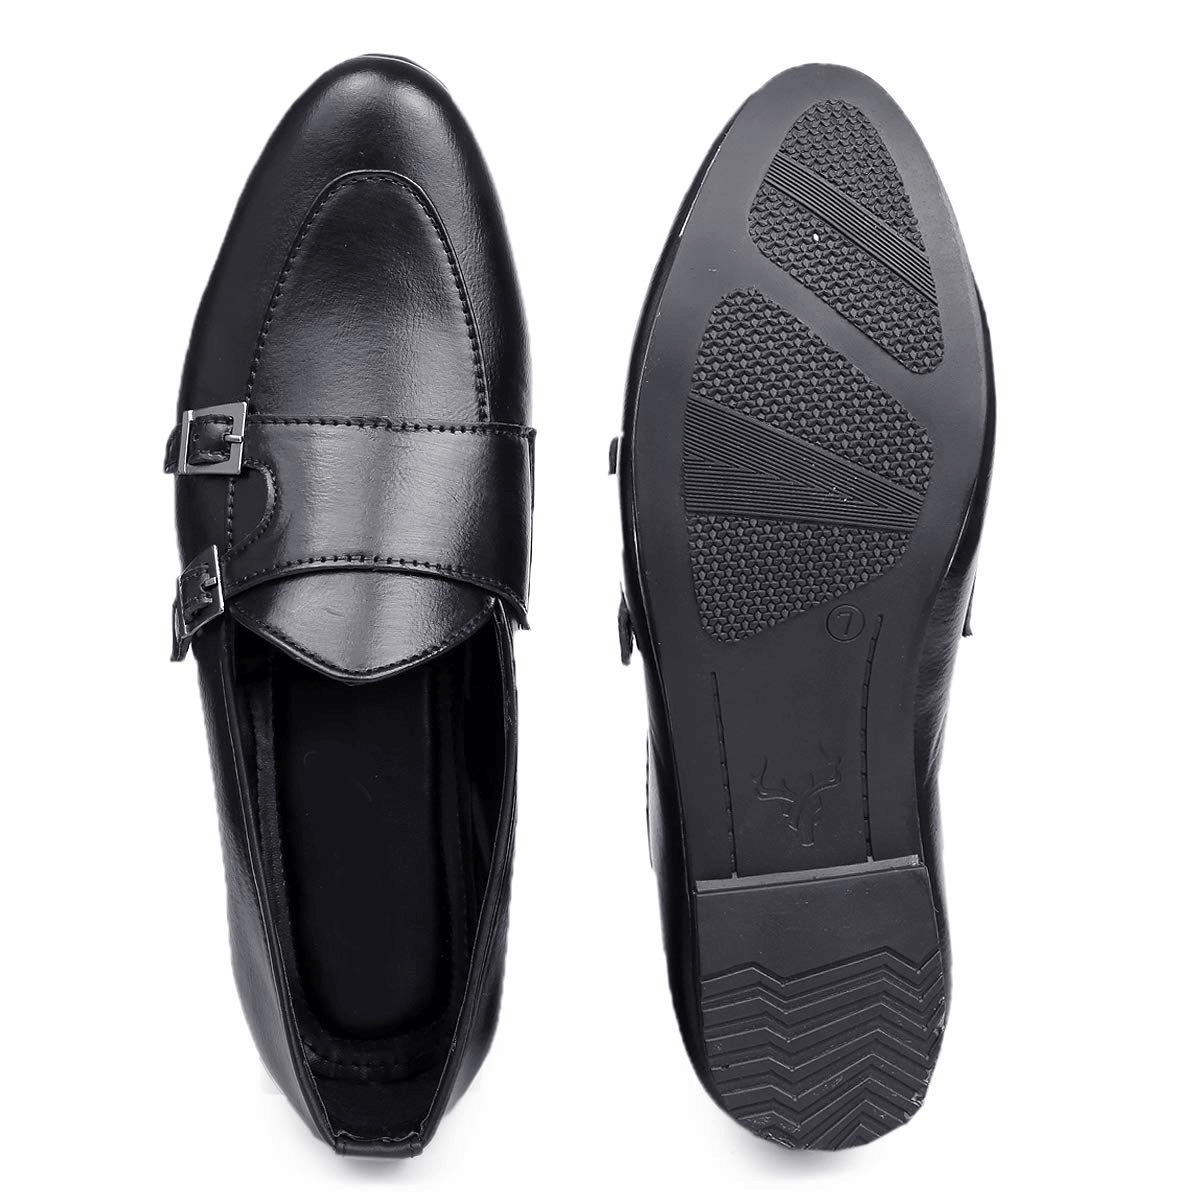 Classic Patent Casual Faux Leather Moccasins  & Slip-On Shoes For Men's-Unique and Classy